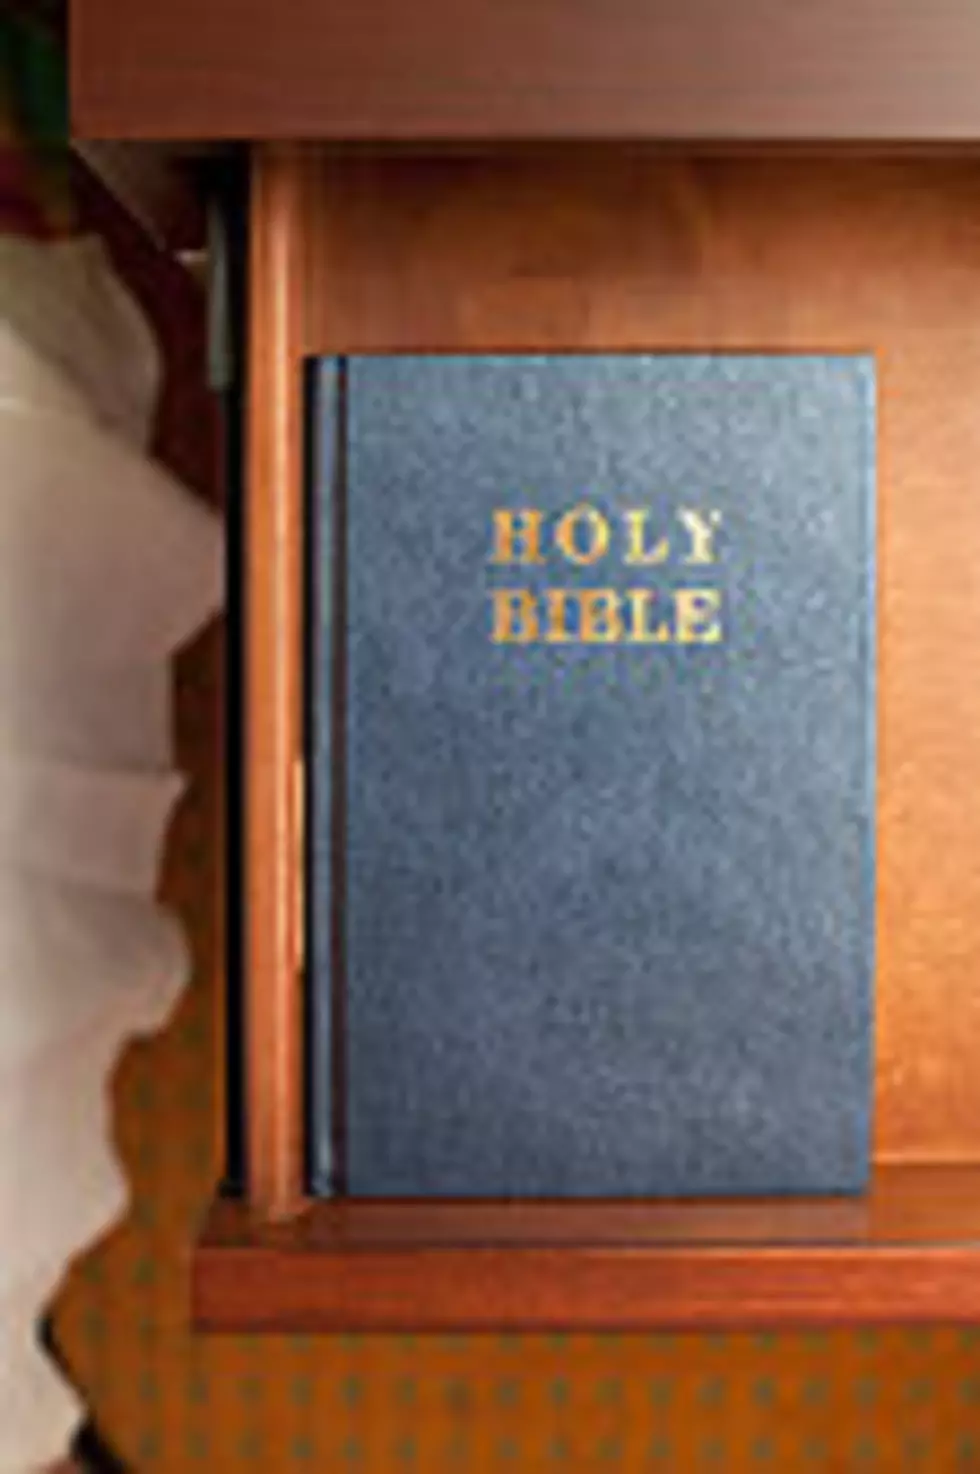 Women Used Bible For Smuggling&#8221;